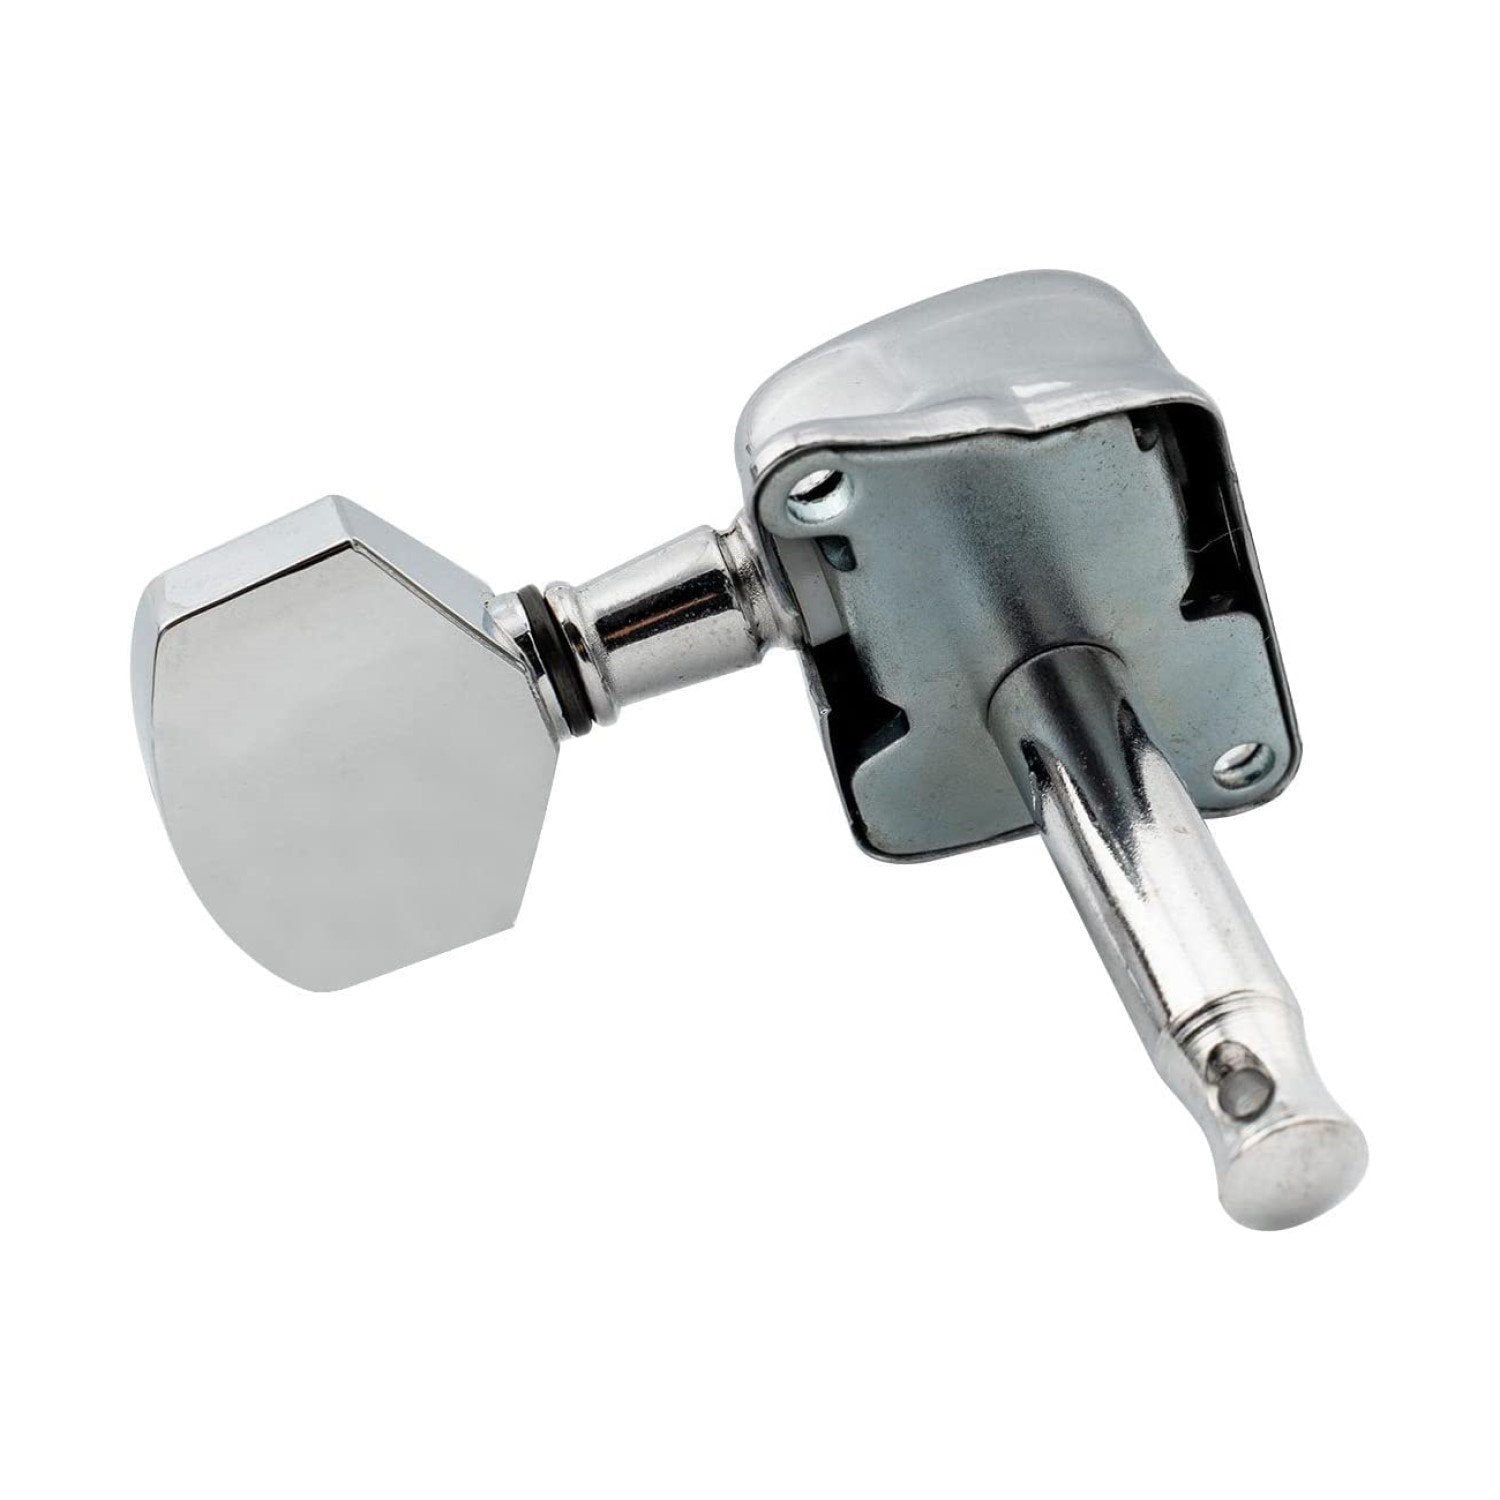 6-in-line Semi Sealed Guitar Tuning Pegs, Chrome